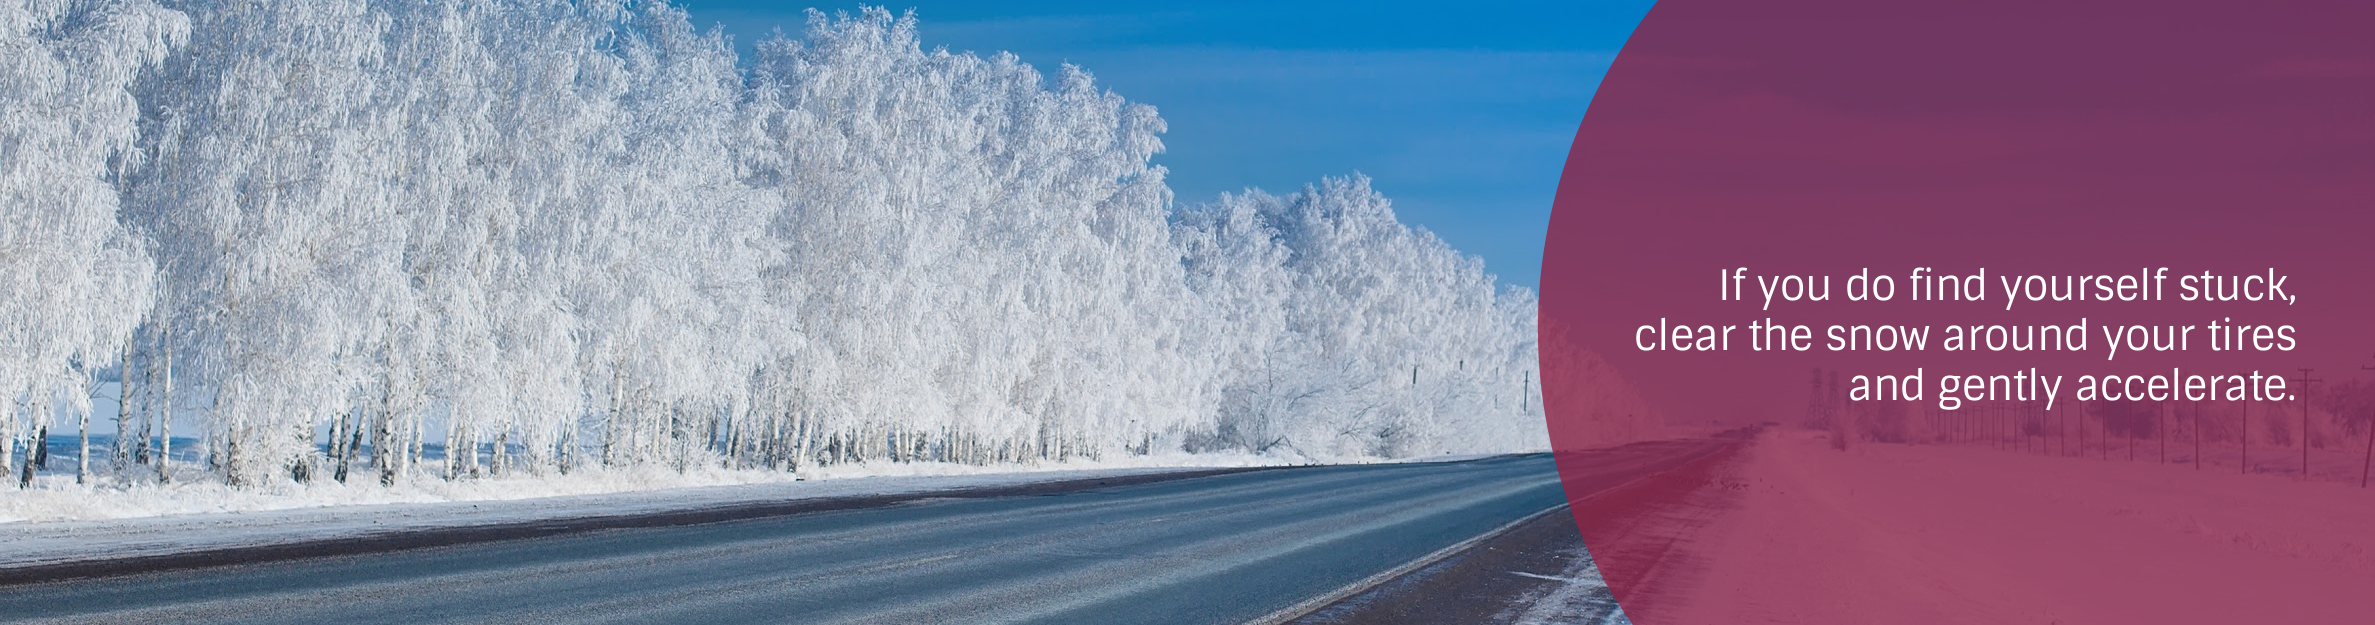 Photo: Winter Road
Text: If you do find yourself stuck, clear the snow around your tires and gently accelerate.